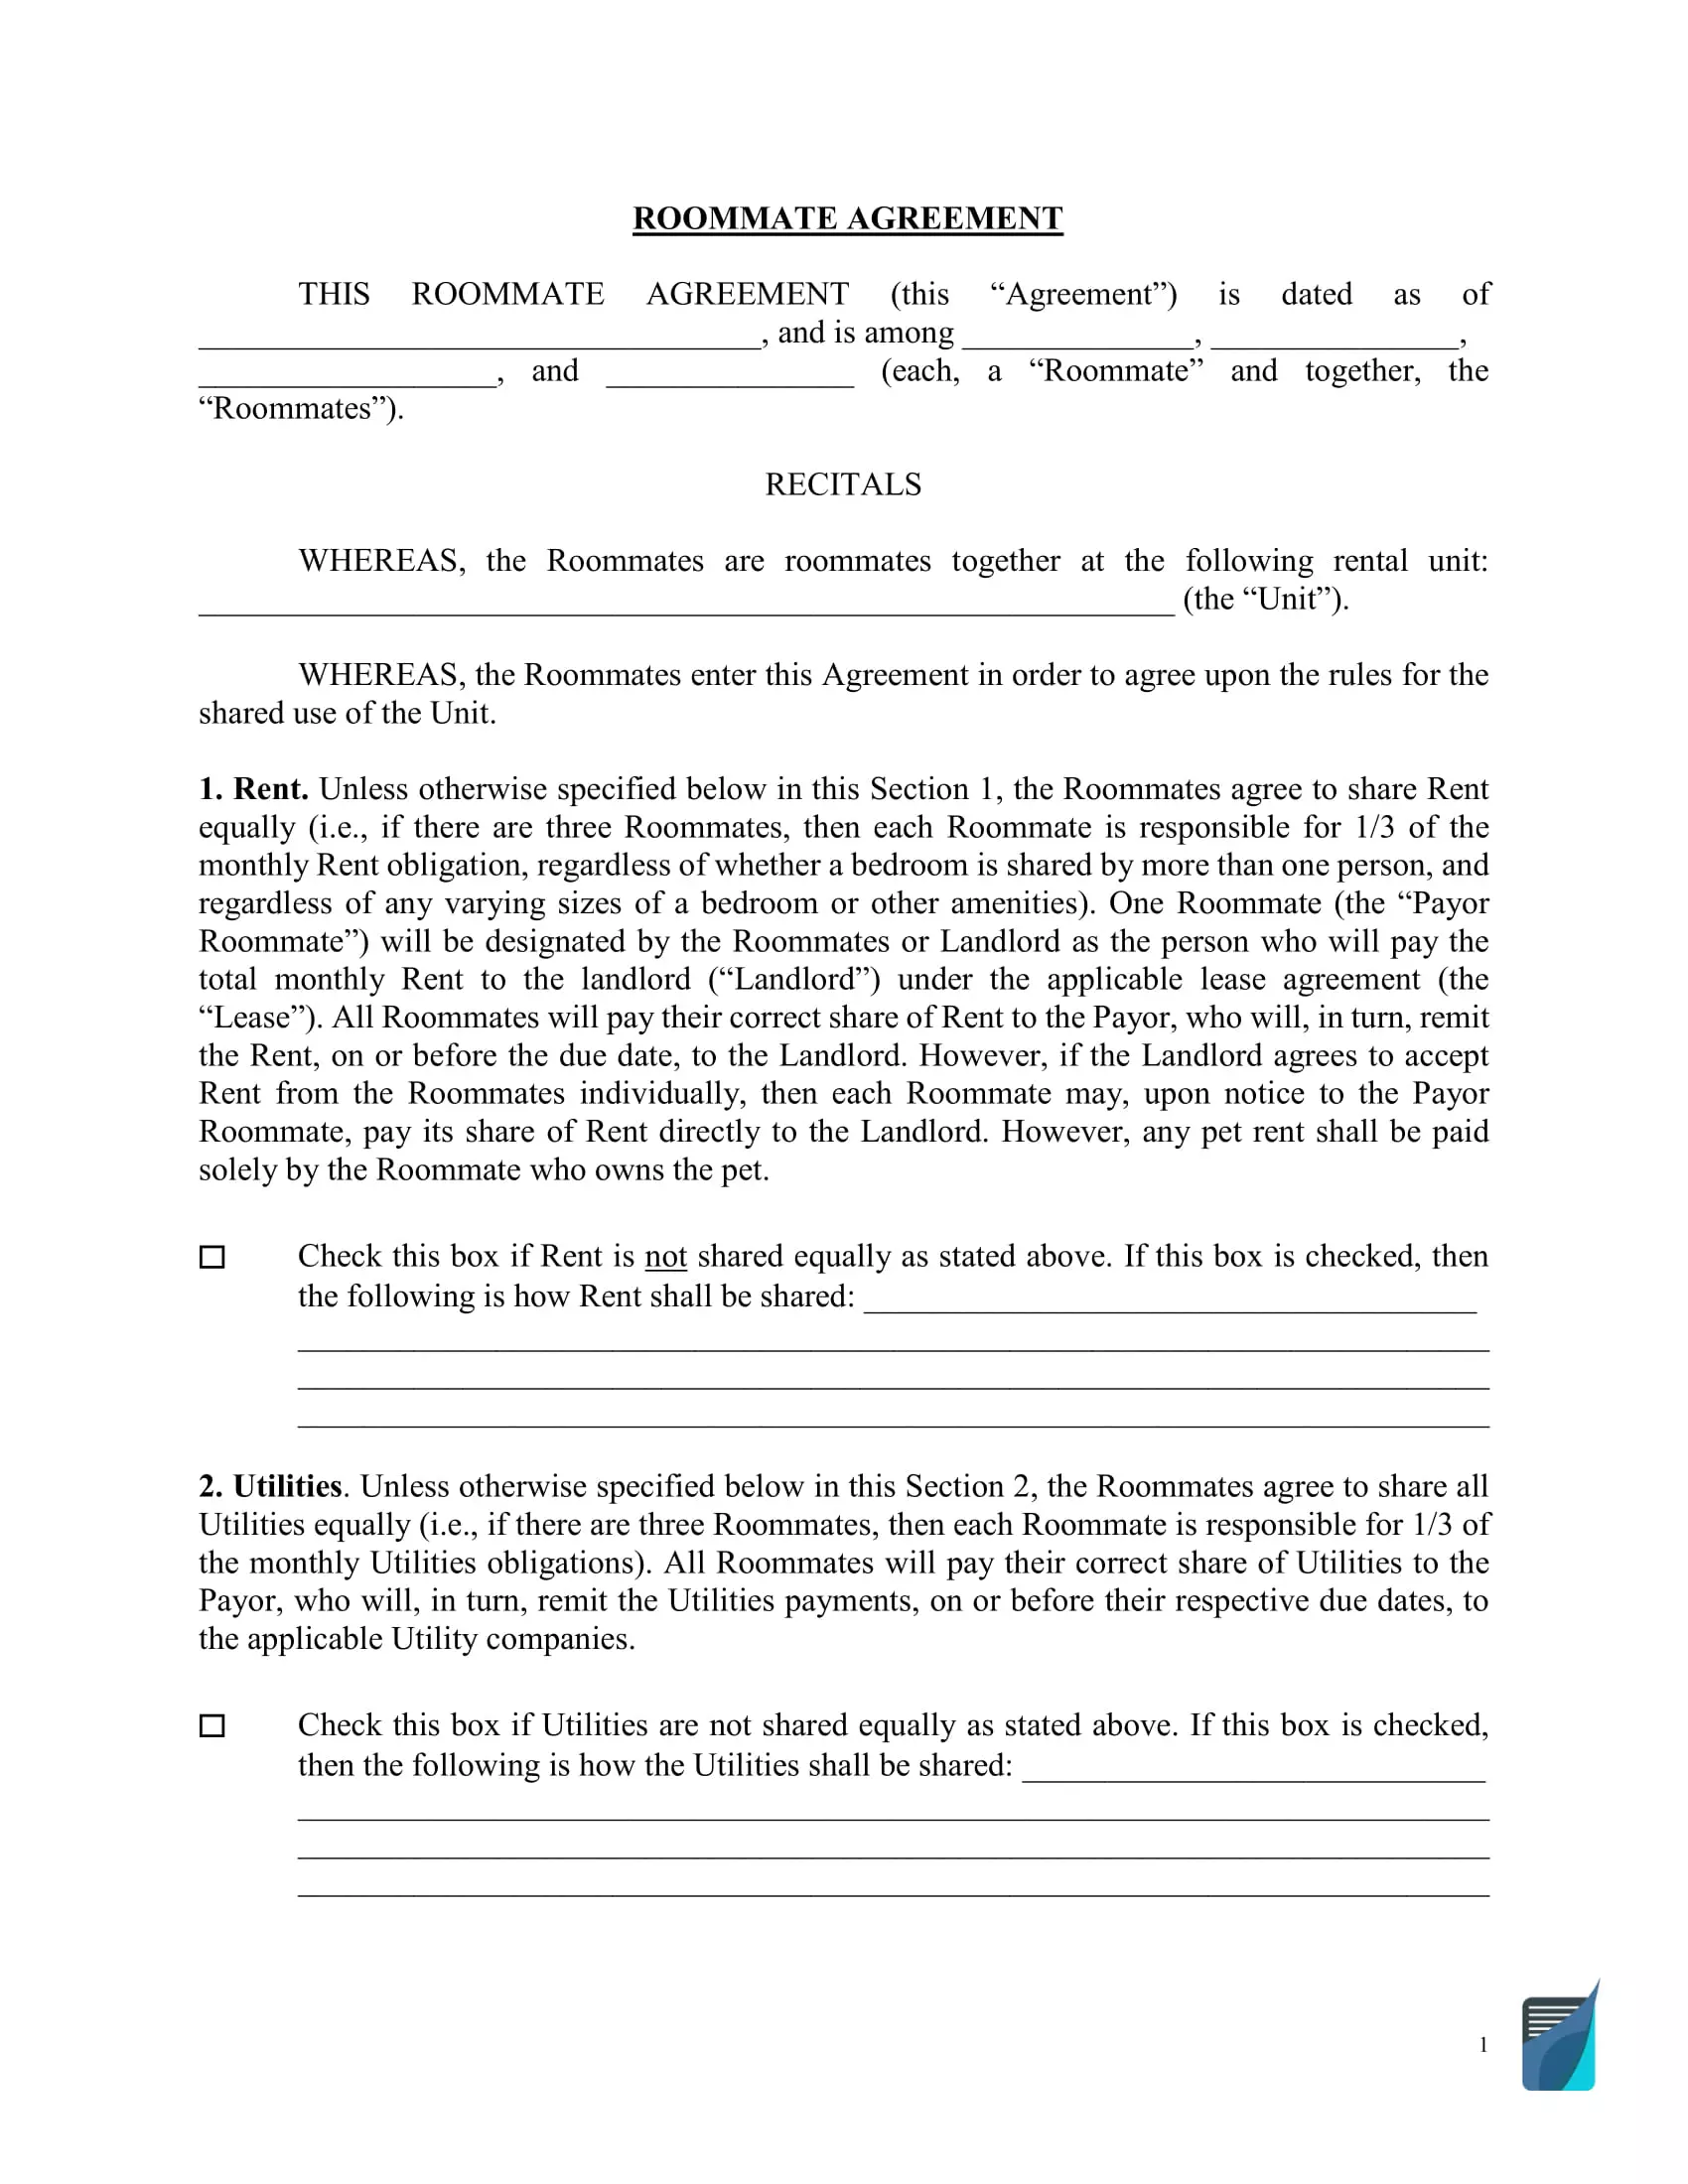 Free Roommate Agreement Template ⇒ Roommate Lease Contract